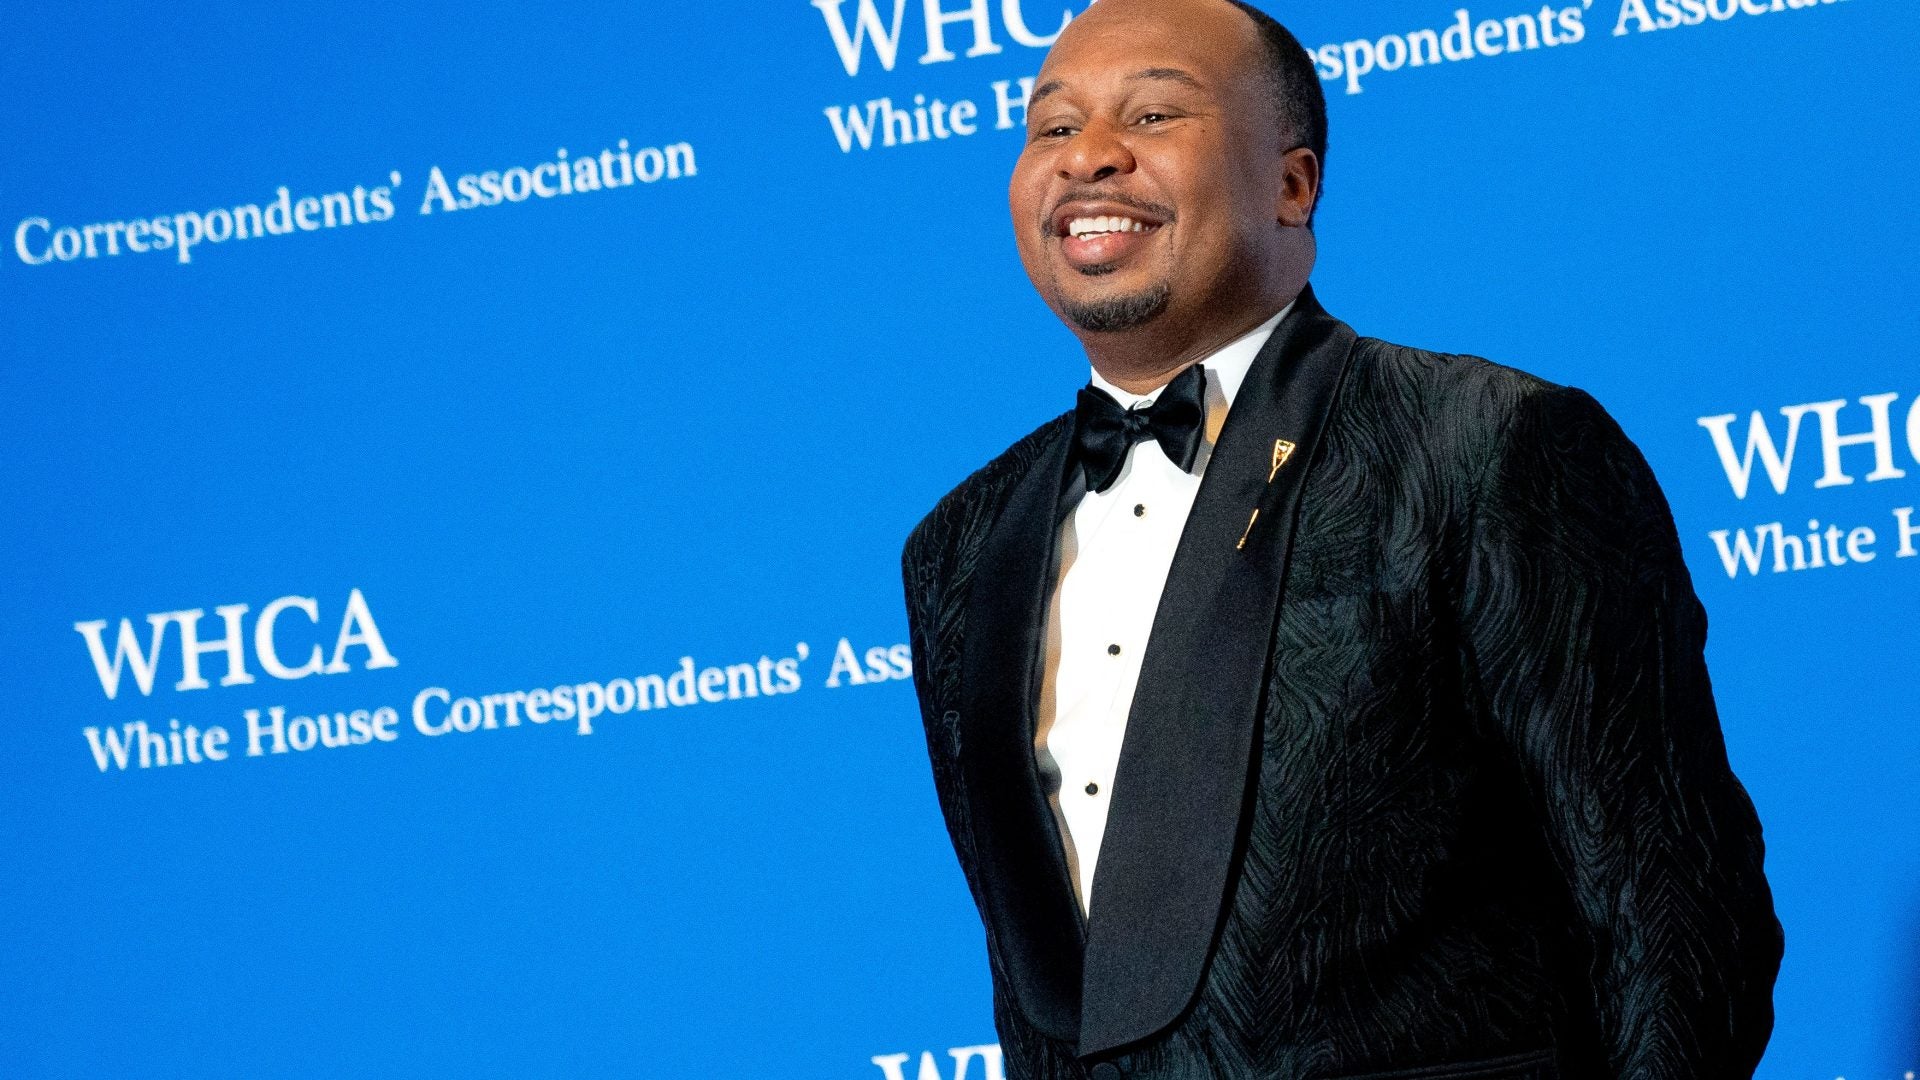 Roy Wood, Jr. On Giving Voice To The Masses At The White House Correspondents' Dinner